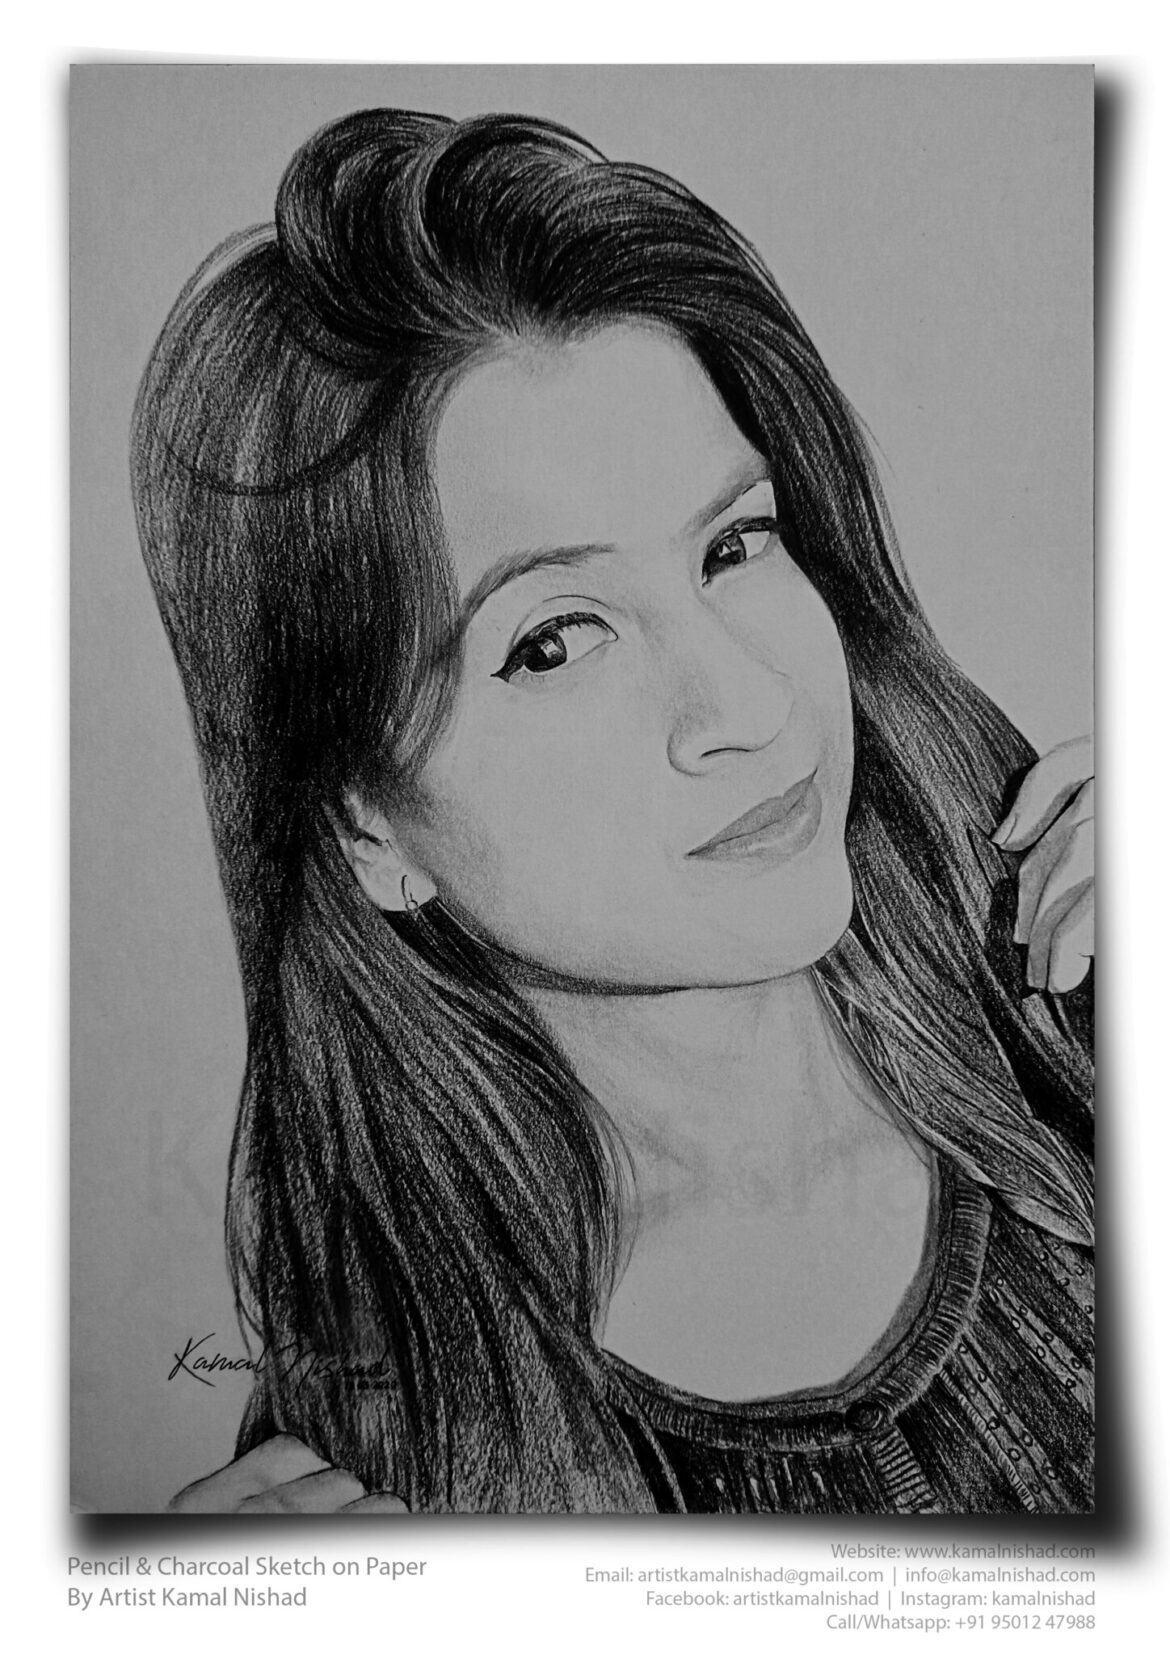 CHARMING | Pencil & Charcoal Sketch Title : CHARMING Medium : Pencil & Charcoal Sketch Size : A3 Paper size (Sketch size 29.7 x 42.0 cm*) Artist : Kamal Nishad This is a Handmade/hand-drawn Sketch made with Pencil & Charcoal “CHARMING”. This is a Gift from One of my Client to her friend/relative. 💐 SIZE: Paper size A3 (work area 11.7 x 16.5 inches *estimated) Created by © Kamal Nishad. All rights reserved.